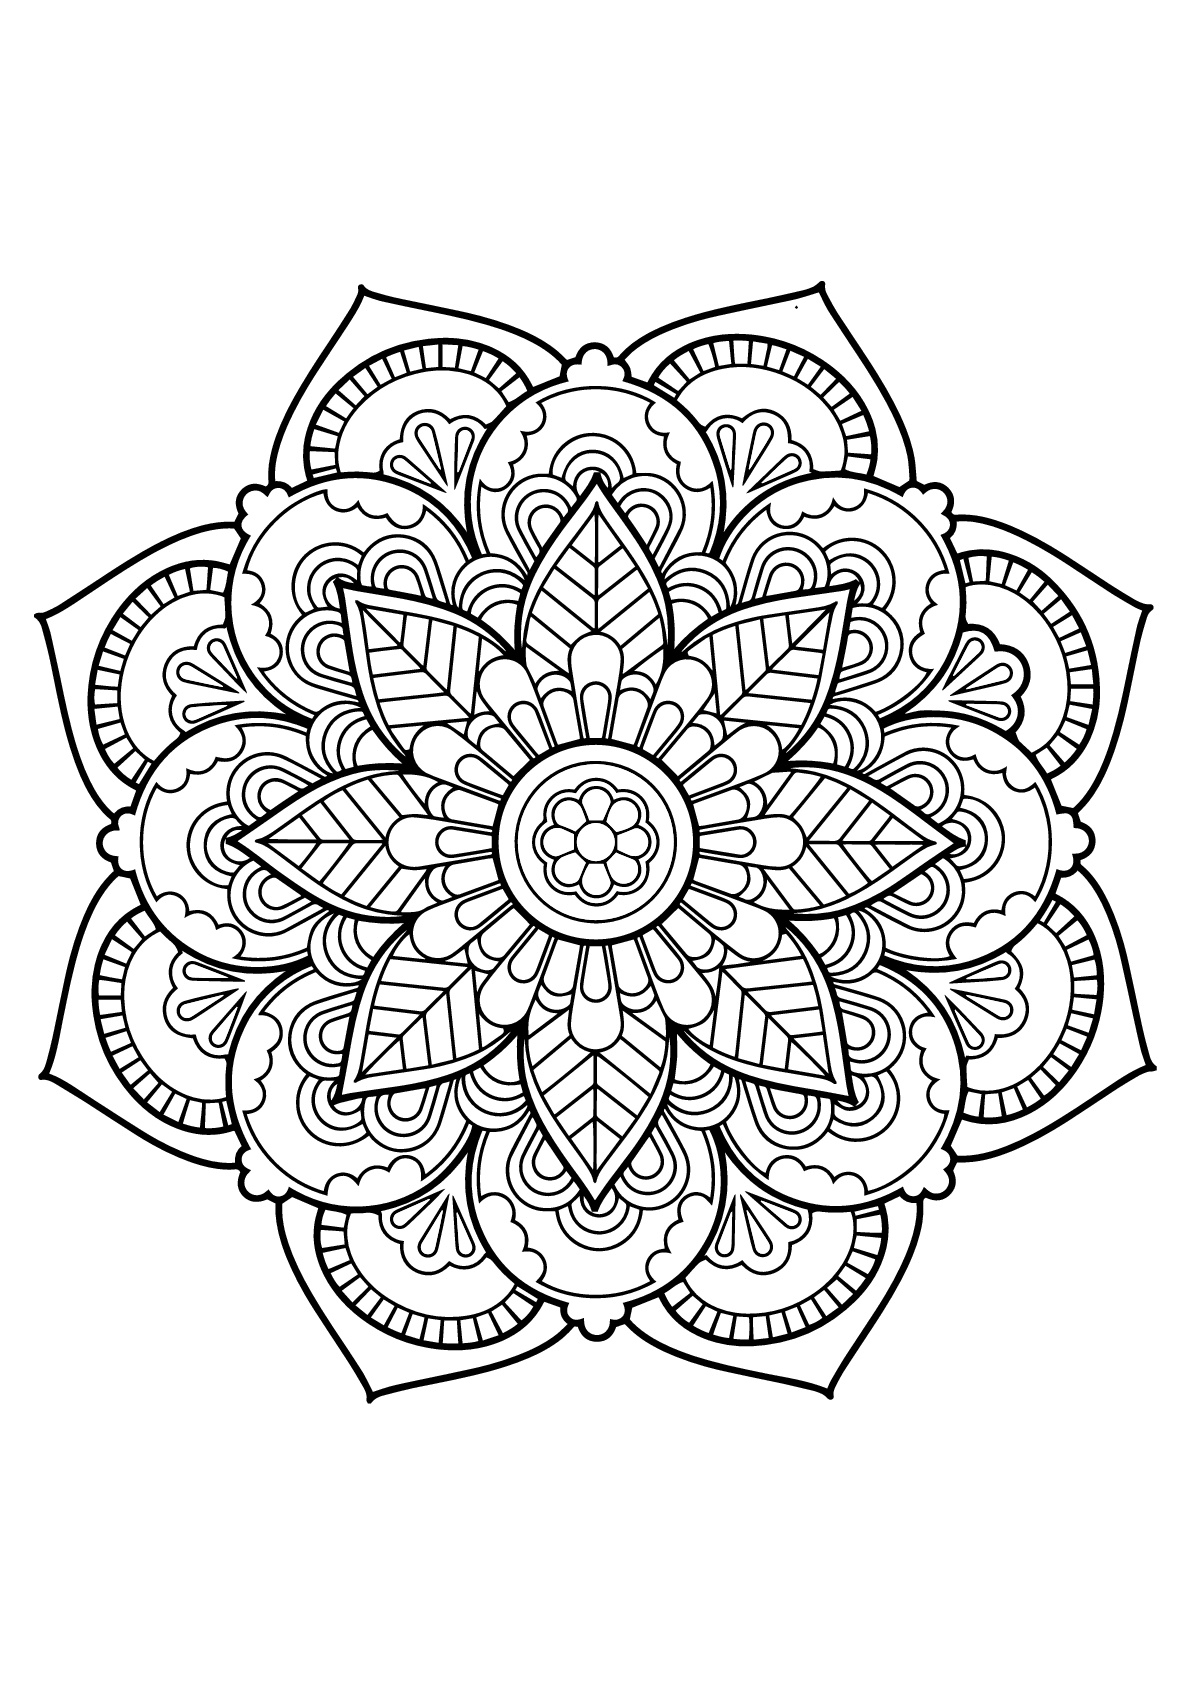 Mandala from free coloring books for adults 22 - M&alas ...